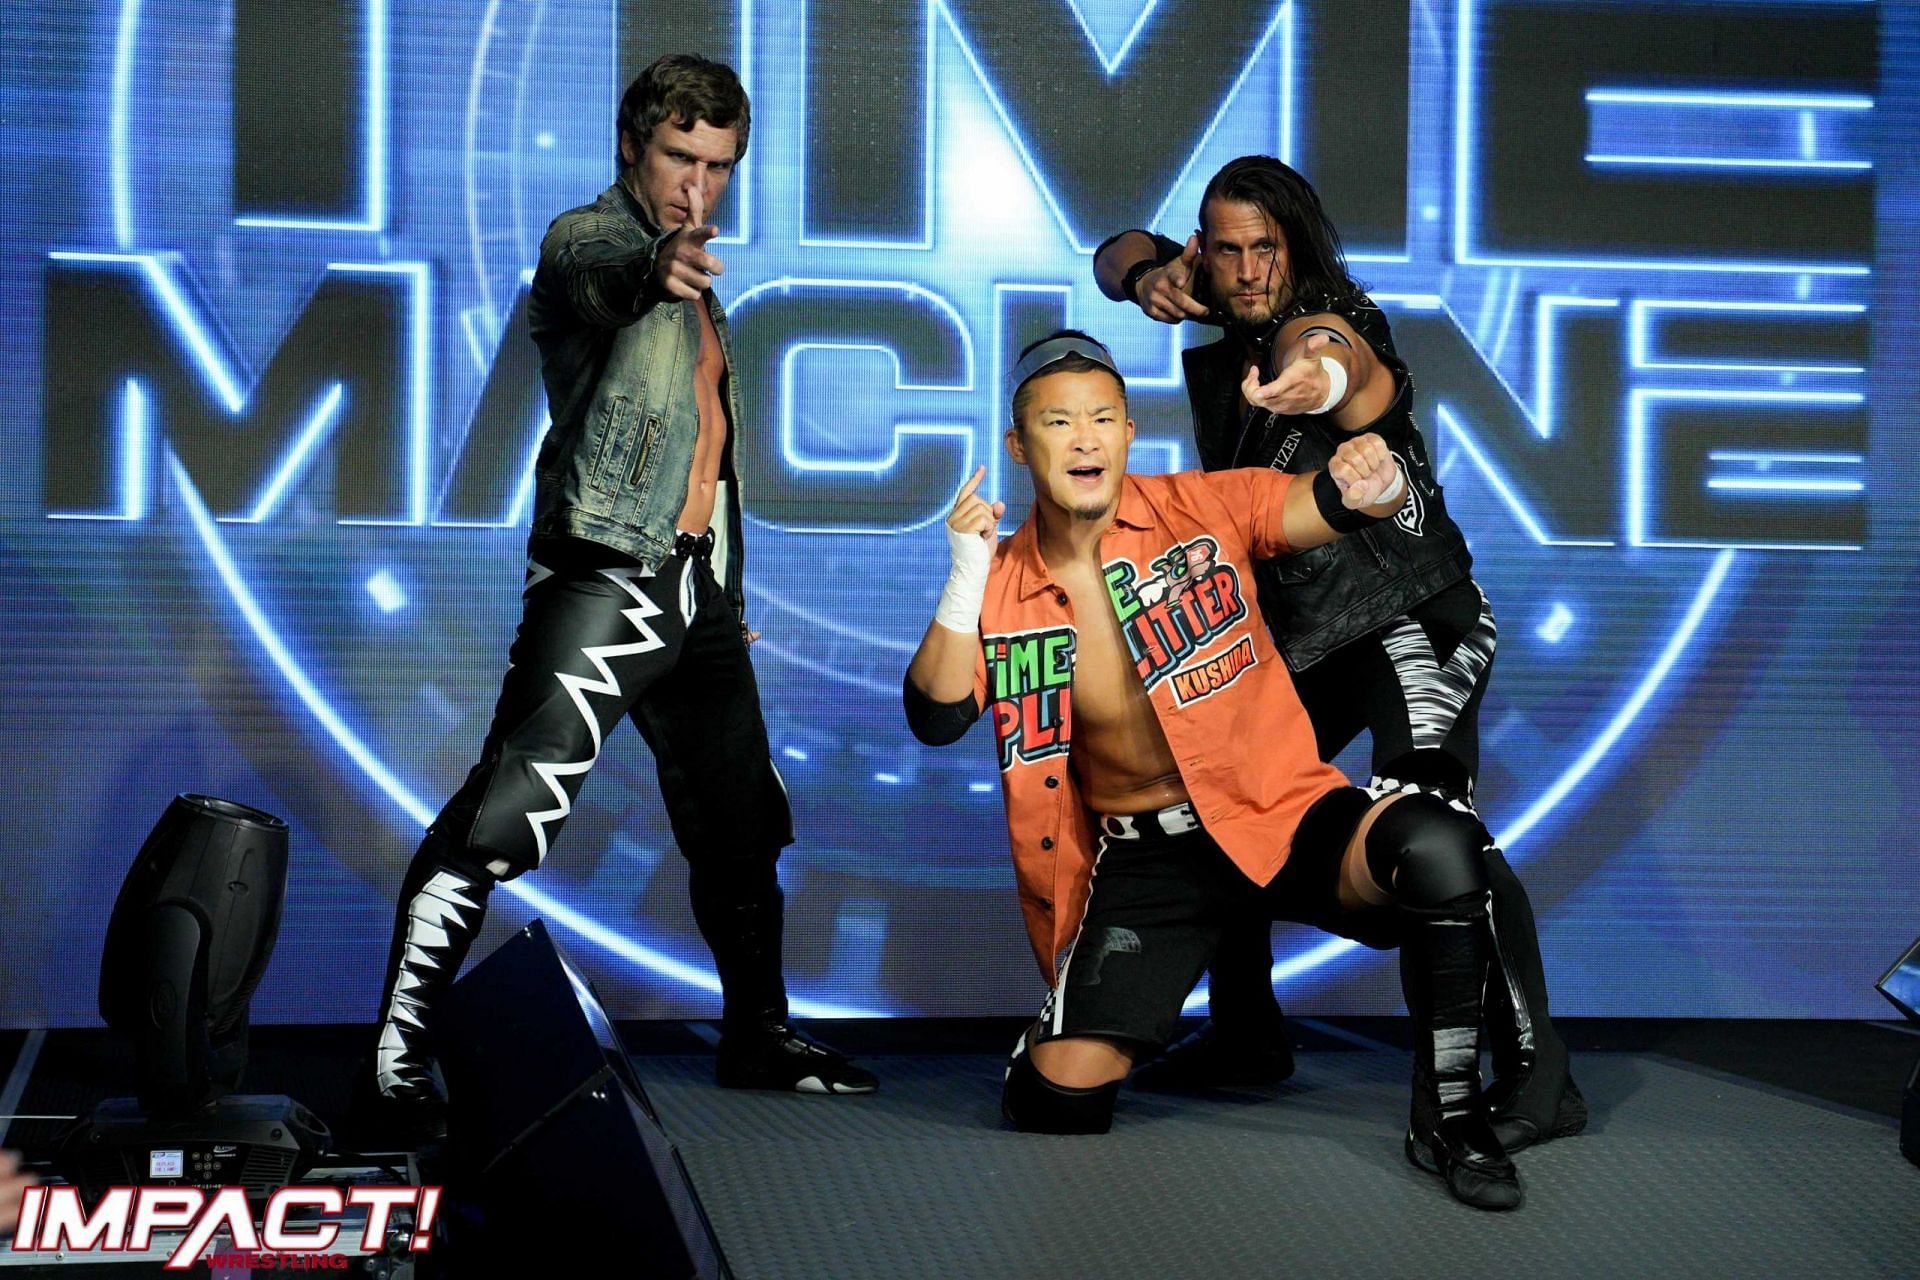 Time Machine battled Violent By Design in an explosive match on IMPACT Wrestling